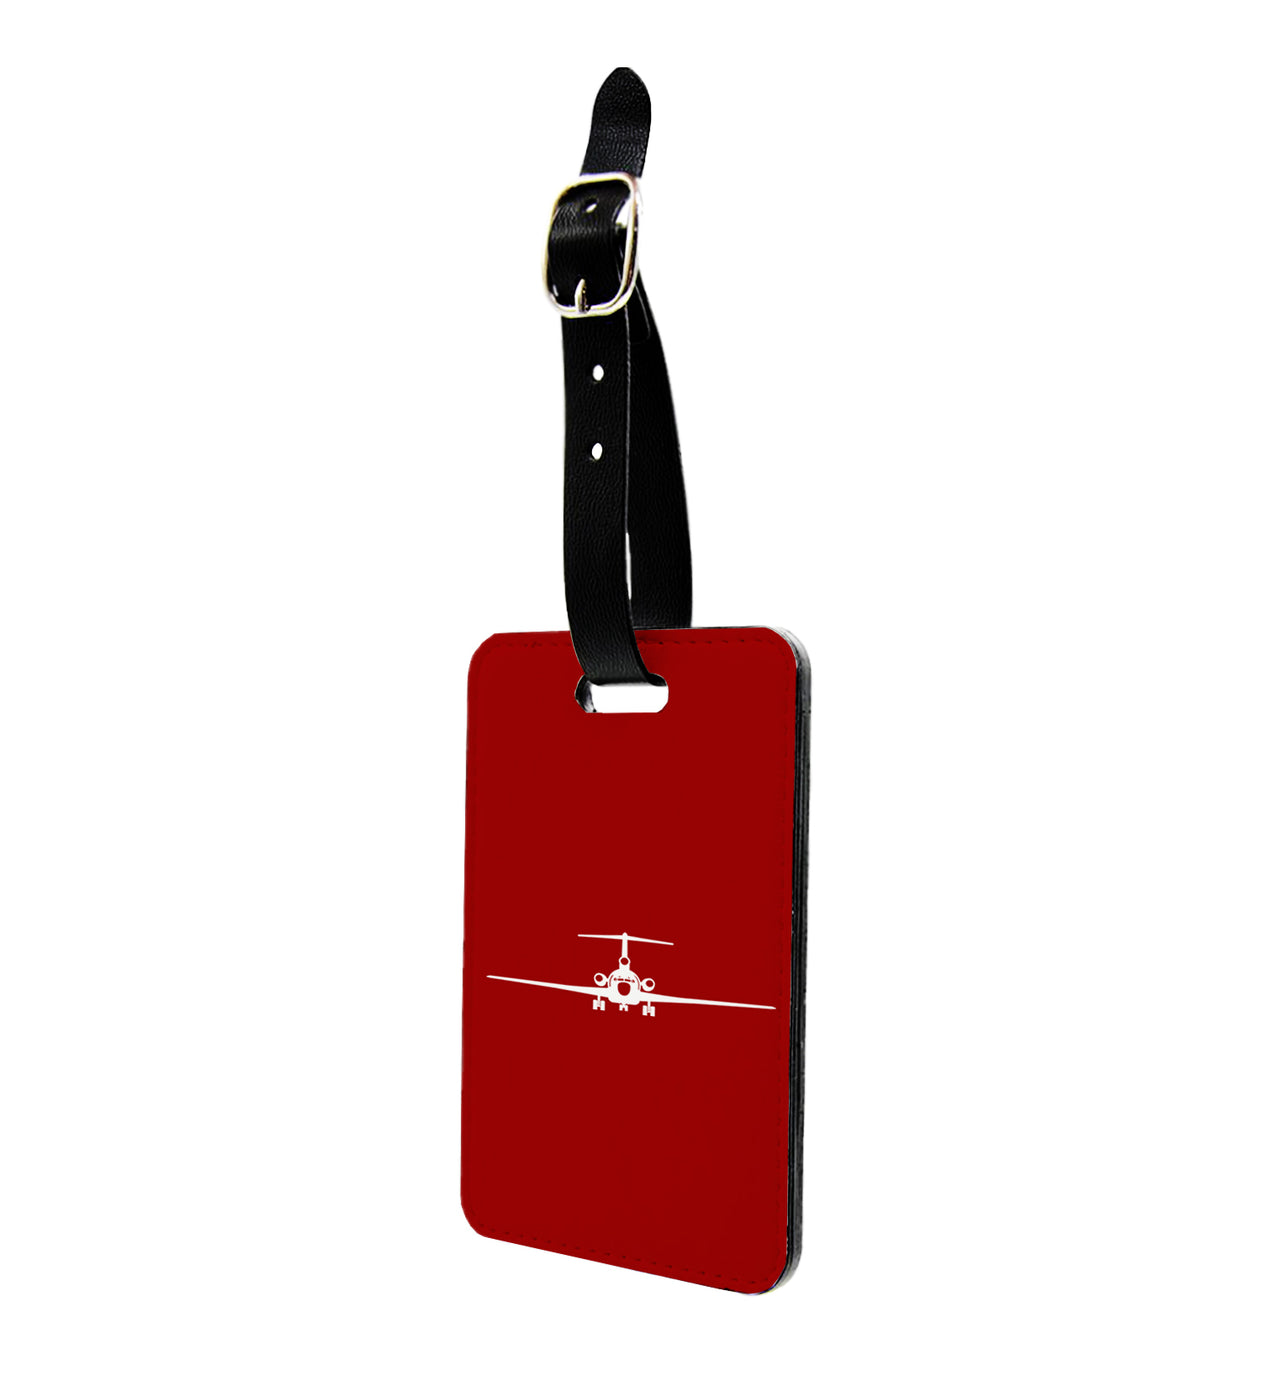 Boeing 727 Silhouette Designed Luggage Tag